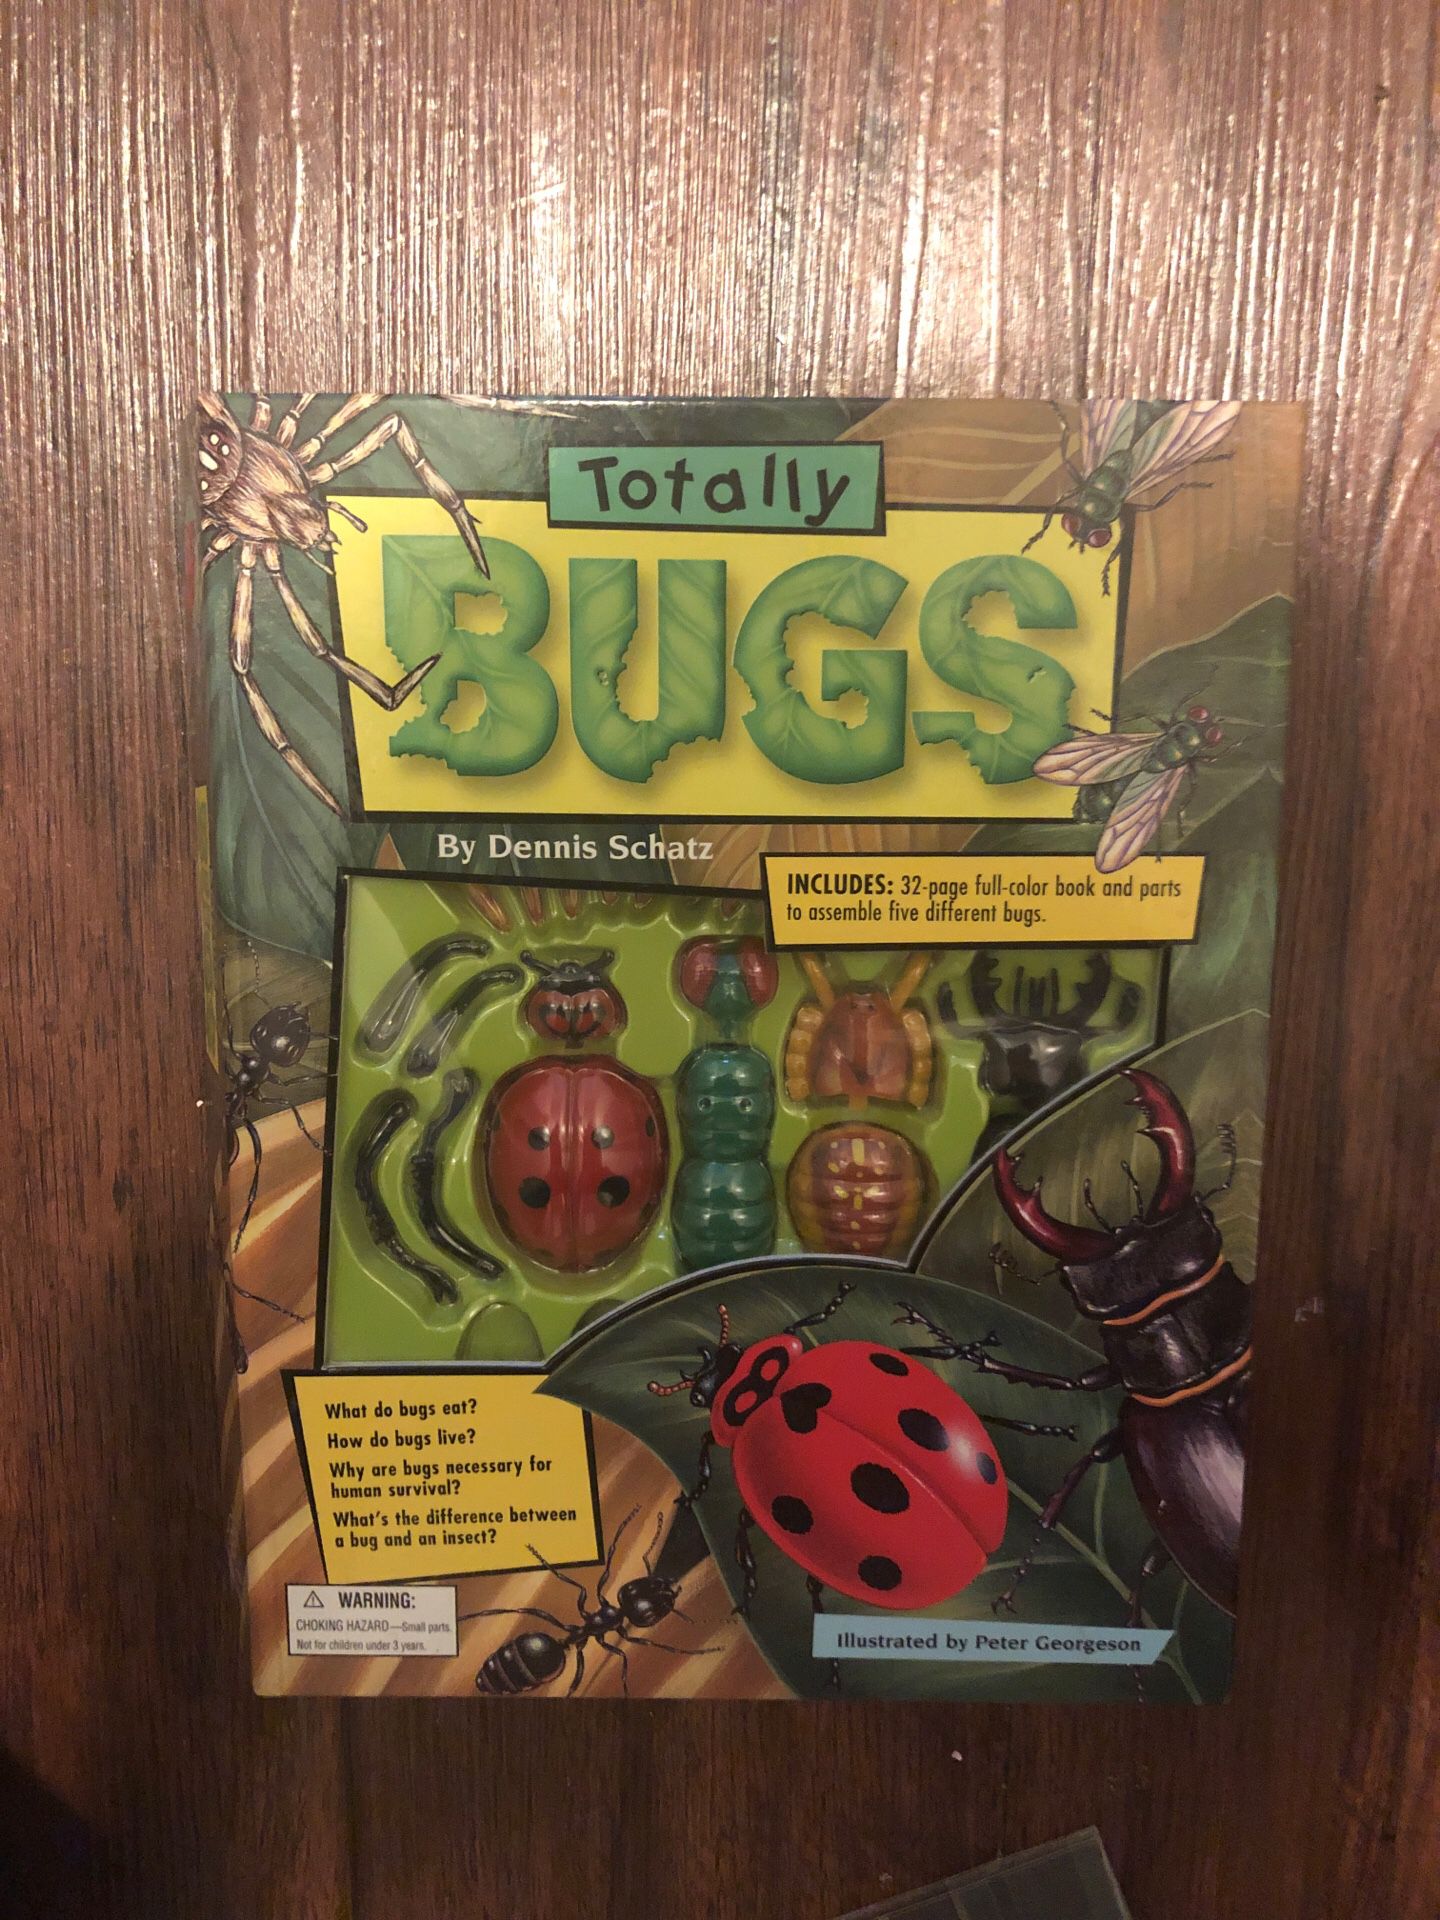 Totally Bugs book with artificial bugs